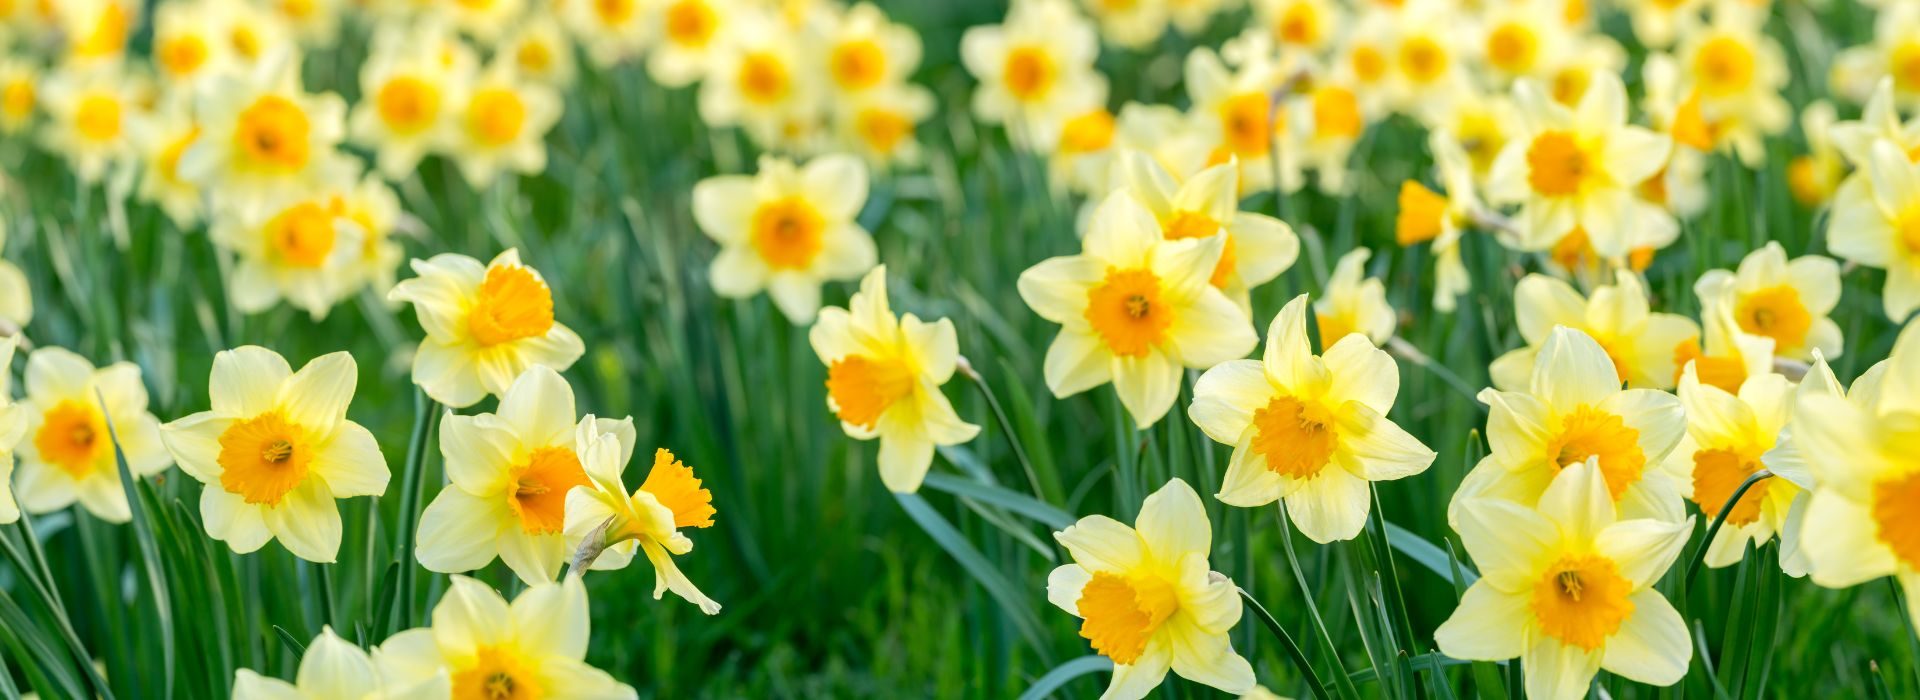 A field of yellow and orange daffodils